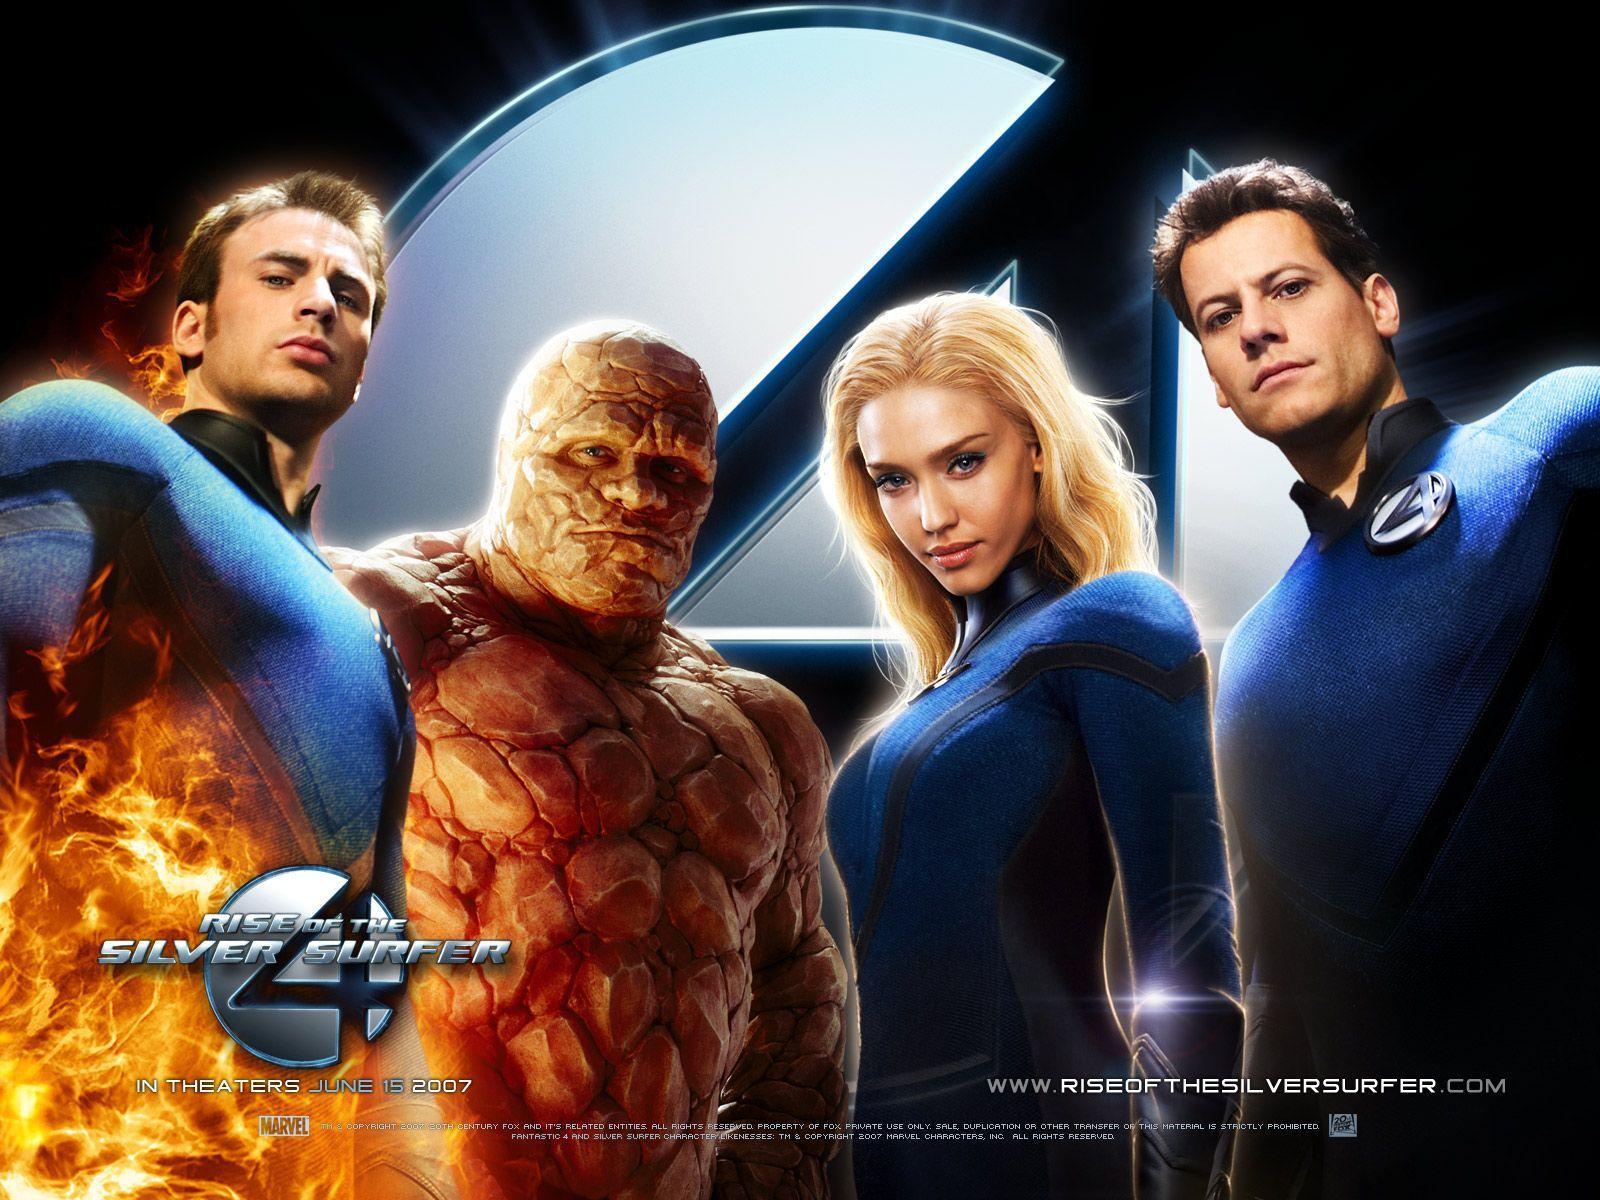 Latest Screens, Fantastic 4: Rise of the Silver Surfer Wallpaper